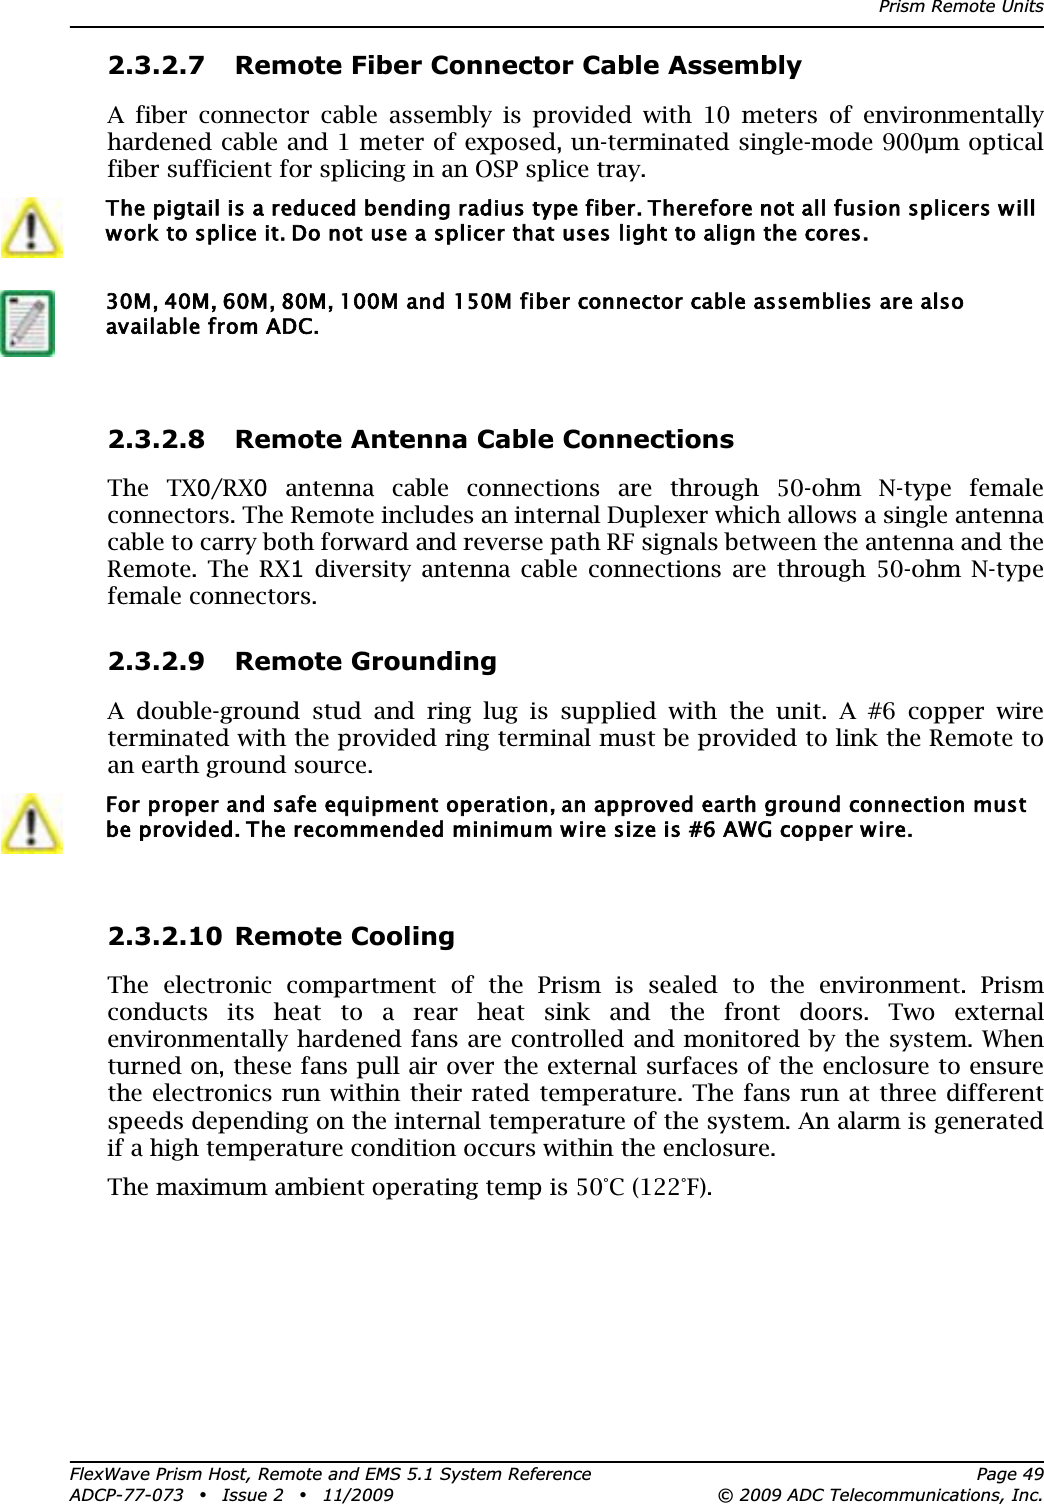 Prism Remote UnitsFlexWave Prism Host, Remote and EMS 5.1 System Reference Page 49ADCP-77-073 • Issue 2 • 11/2009 © 2009 ADC Telecommunications, Inc.2.3.2.7 Remote Fiber Connector Cable AssemblyA fiber connector cable assembly is provided with 10 meters of environmentally hardened cable and 1 meter of exposed, un-terminated single-mode 900μm optical fiber sufficient for splicing in an OSP splice tray.2.3.2.8 Remote Antenna Cable ConnectionsThe TX0/RX0 antenna cable connections are through 50-ohm N-type female connectors. The Remote includes an internal Duplexer which allows a single antenna cable to carry both forward and reverse path RF signals between the antenna and the Remote. The RX1 diversity antenna cable connections are through 50-ohm N-type female connectors.2.3.2.9 Remote GroundingA double-ground stud and ring lug is supplied with the unit. A #6 copper wire terminated with the provided ring terminal must be provided to link the Remote to an earth ground source.2.3.2.10 Remote CoolingThe electronic compartment of the Prism is sealed to the environment. Prism conducts its heat to a rear heat sink and the front doors. Two external environmentally hardened fans are controlled and monitored by the system. When turned on, these fans pull air over the external surfaces of the enclosure to ensure the electronics run within their rated temperature. The fans run at three different speeds depending on the internal temperature of the system. An alarm is generated if a high temperature condition occurs within the enclosure.The maximum ambient operating temp is 50°C (122°F).The pigtail is a reduced bending radius type fiber. Therefore not all fusion splicers will work to splice it. Do not use a splicer that uses light to align the cores. 30M, 40M, 60M, 80M, 100M and 150M fiber connector cable assemblies are also available from ADC.For proper and safe equipment operation, an approved earth ground connection must be provided. The recommended minimum wire size is #6 AWG copper wire.